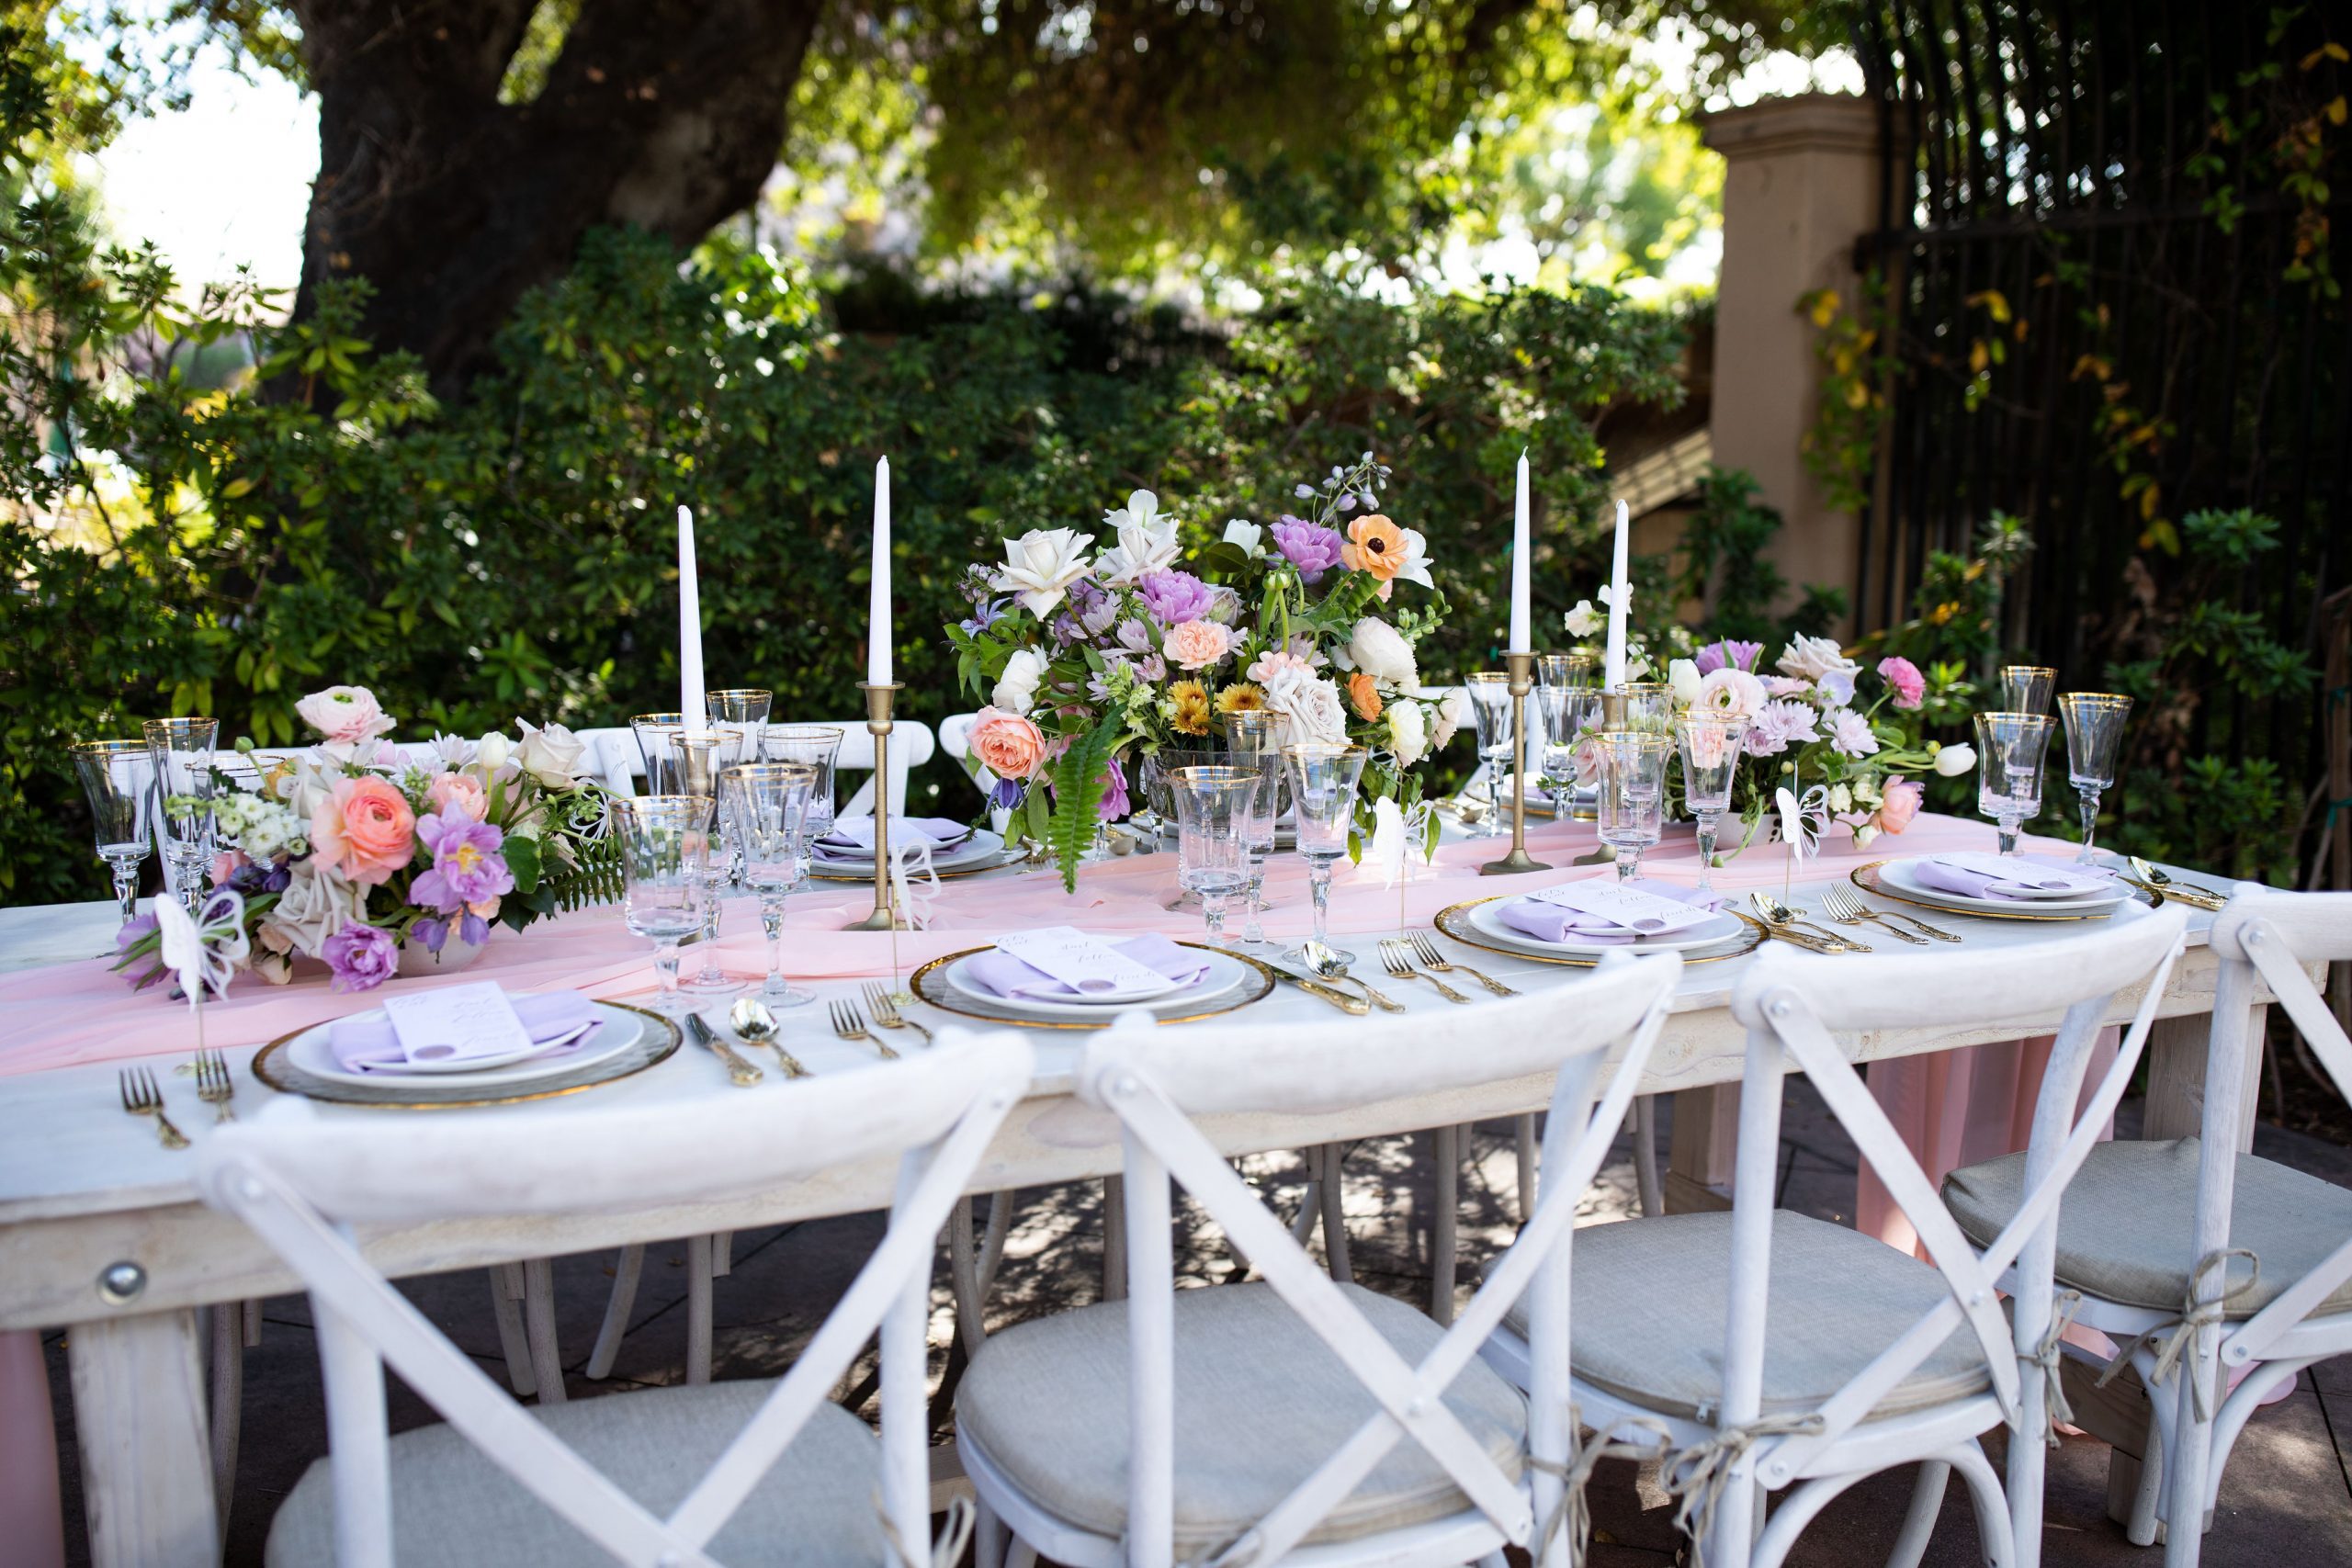 Southern California’s Premier Destination For Charming Party Rentals